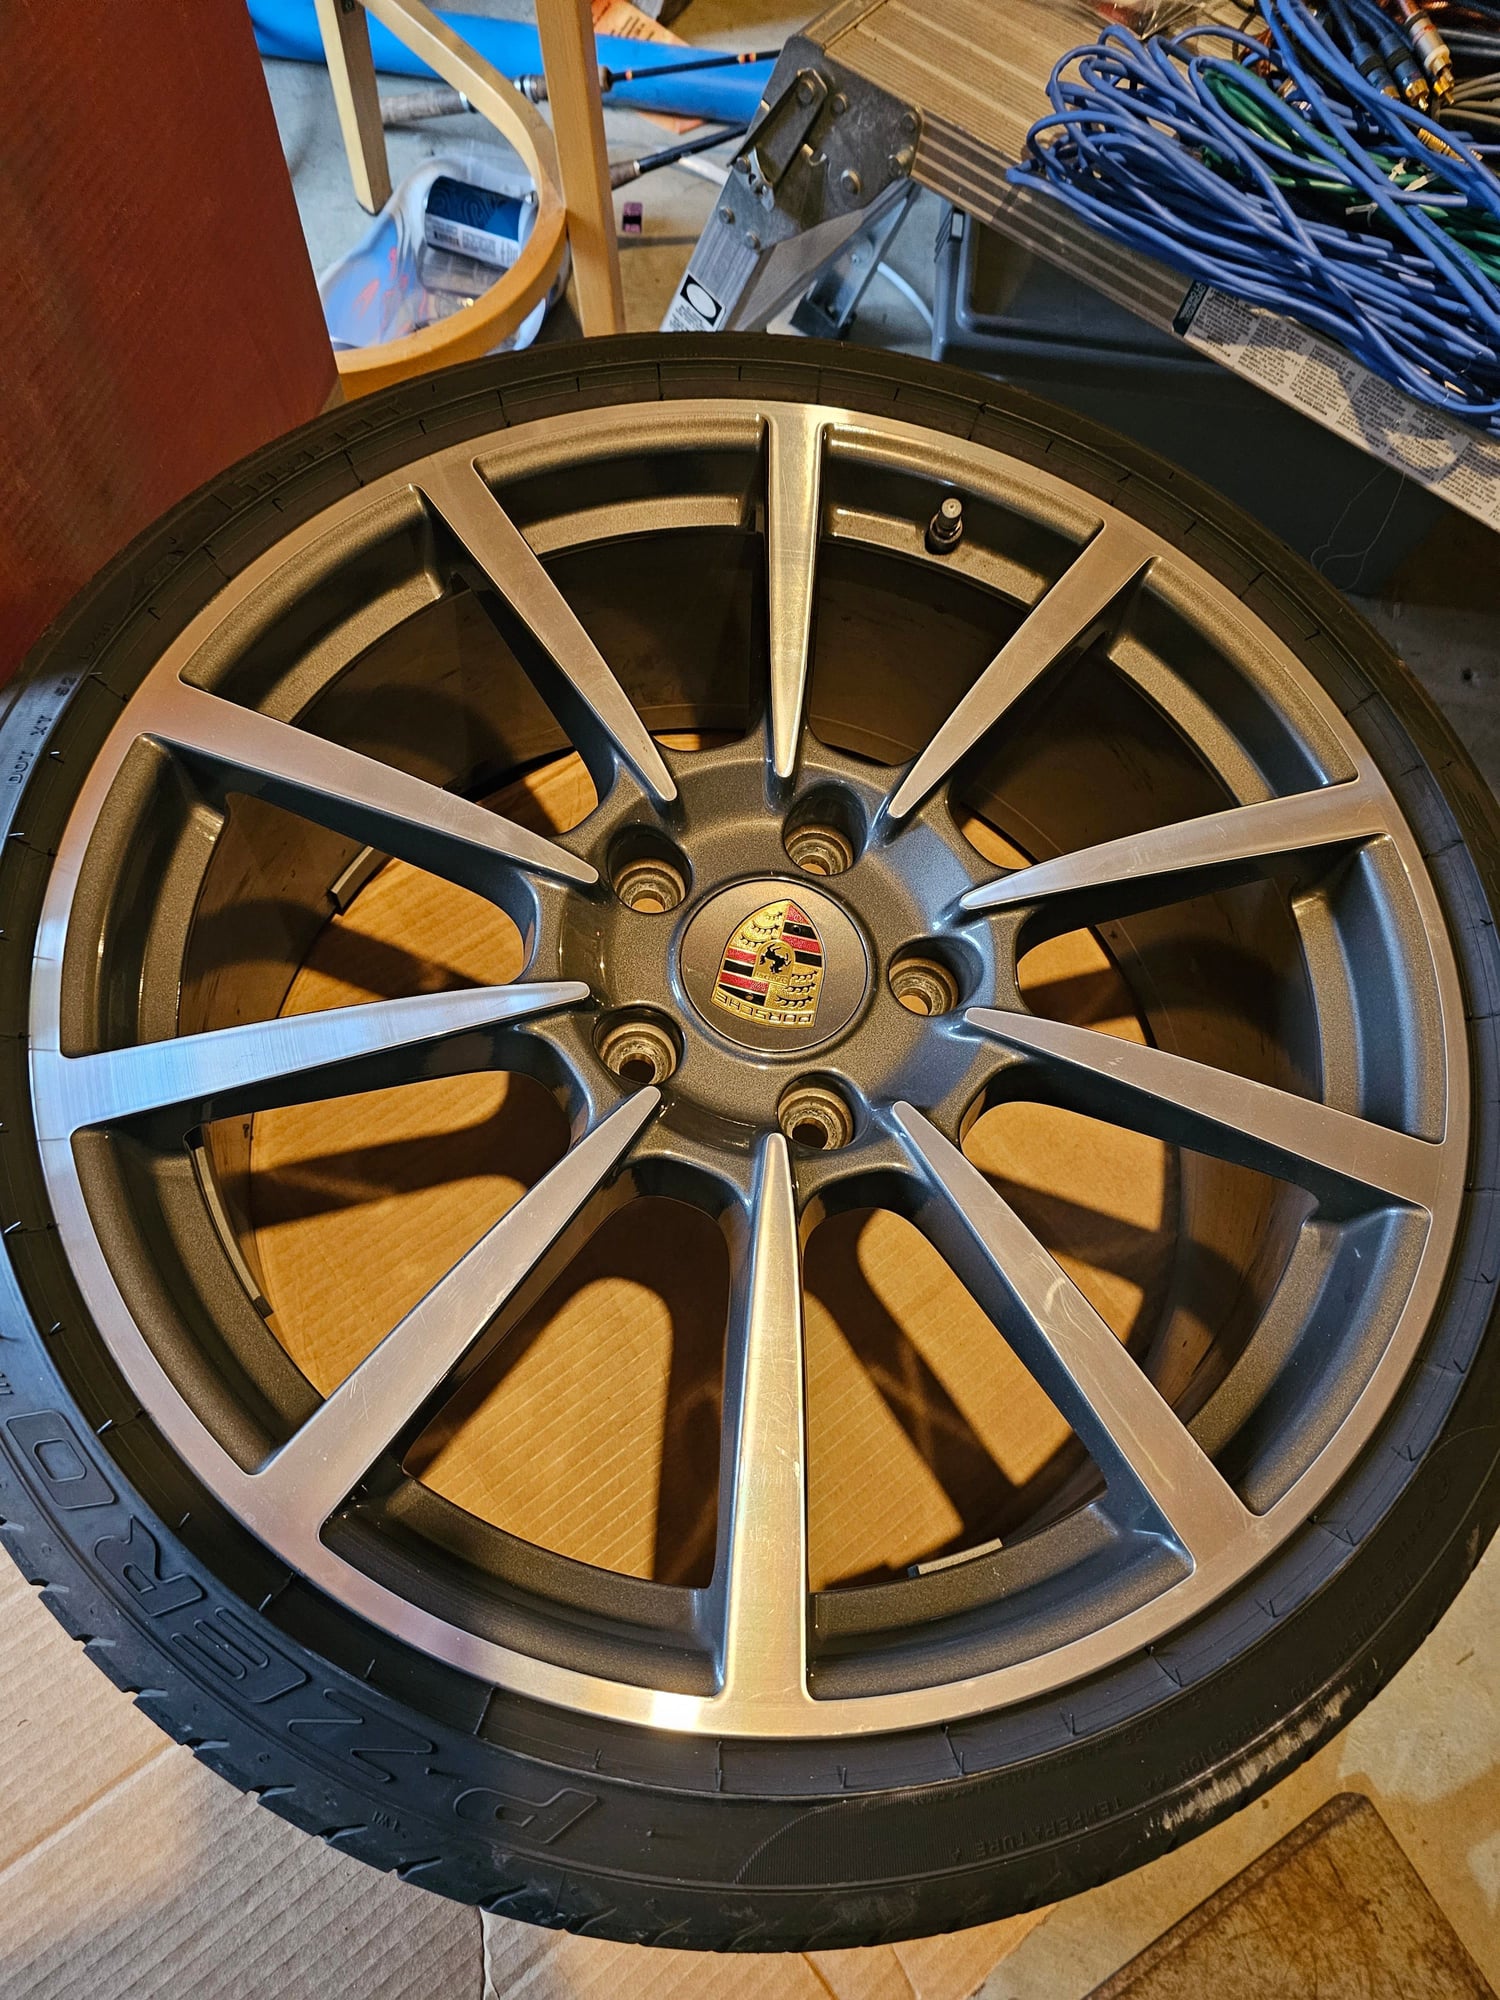 Wheels and Tires/Axles - 20" 991 Sport Classic wheels with TPMS and colored center caps - Used - 2012 to 2016 Porsche 911 - Purcellville, VA 20132, United States